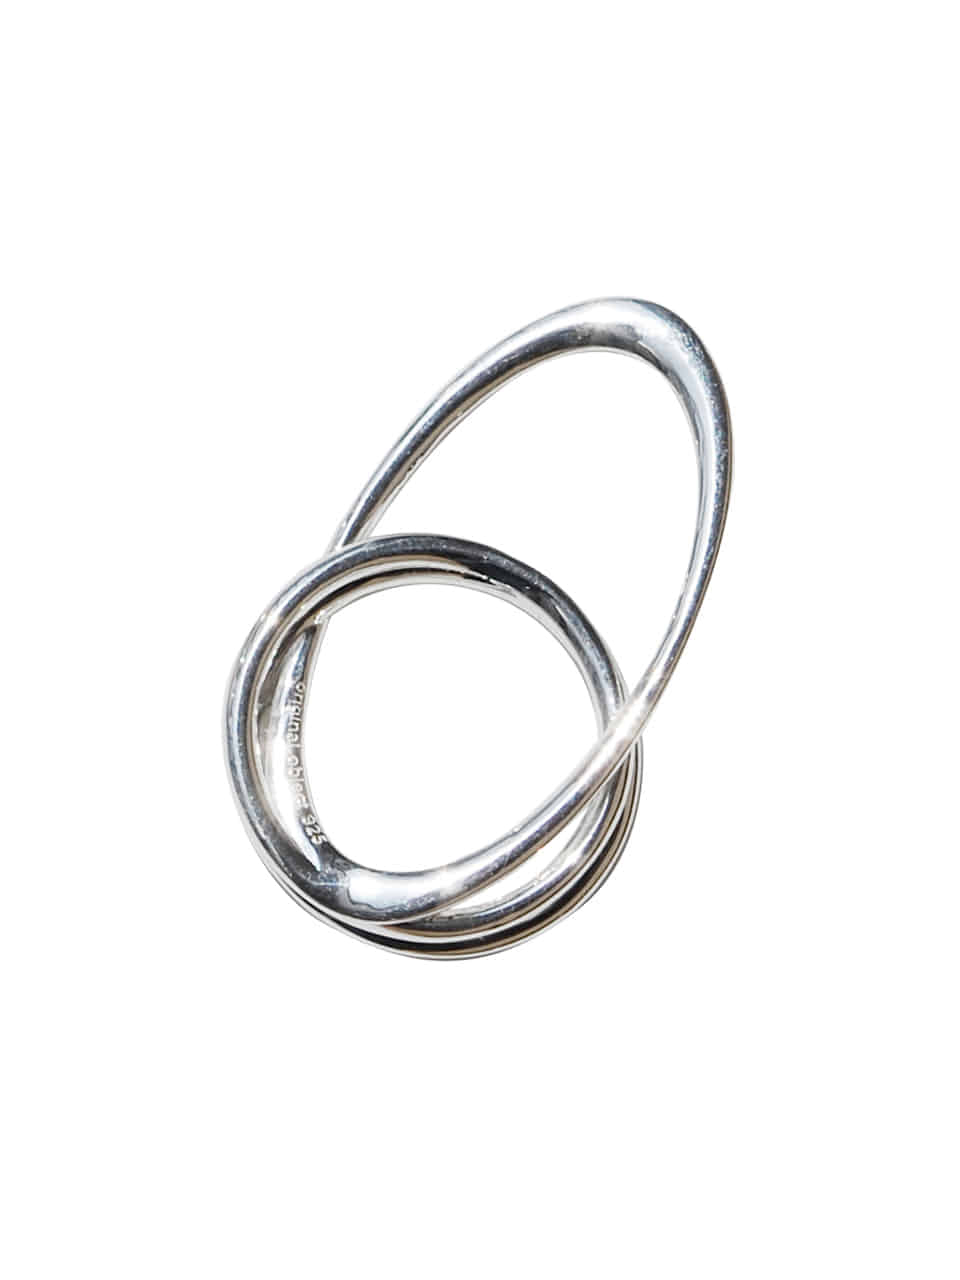 structural ring